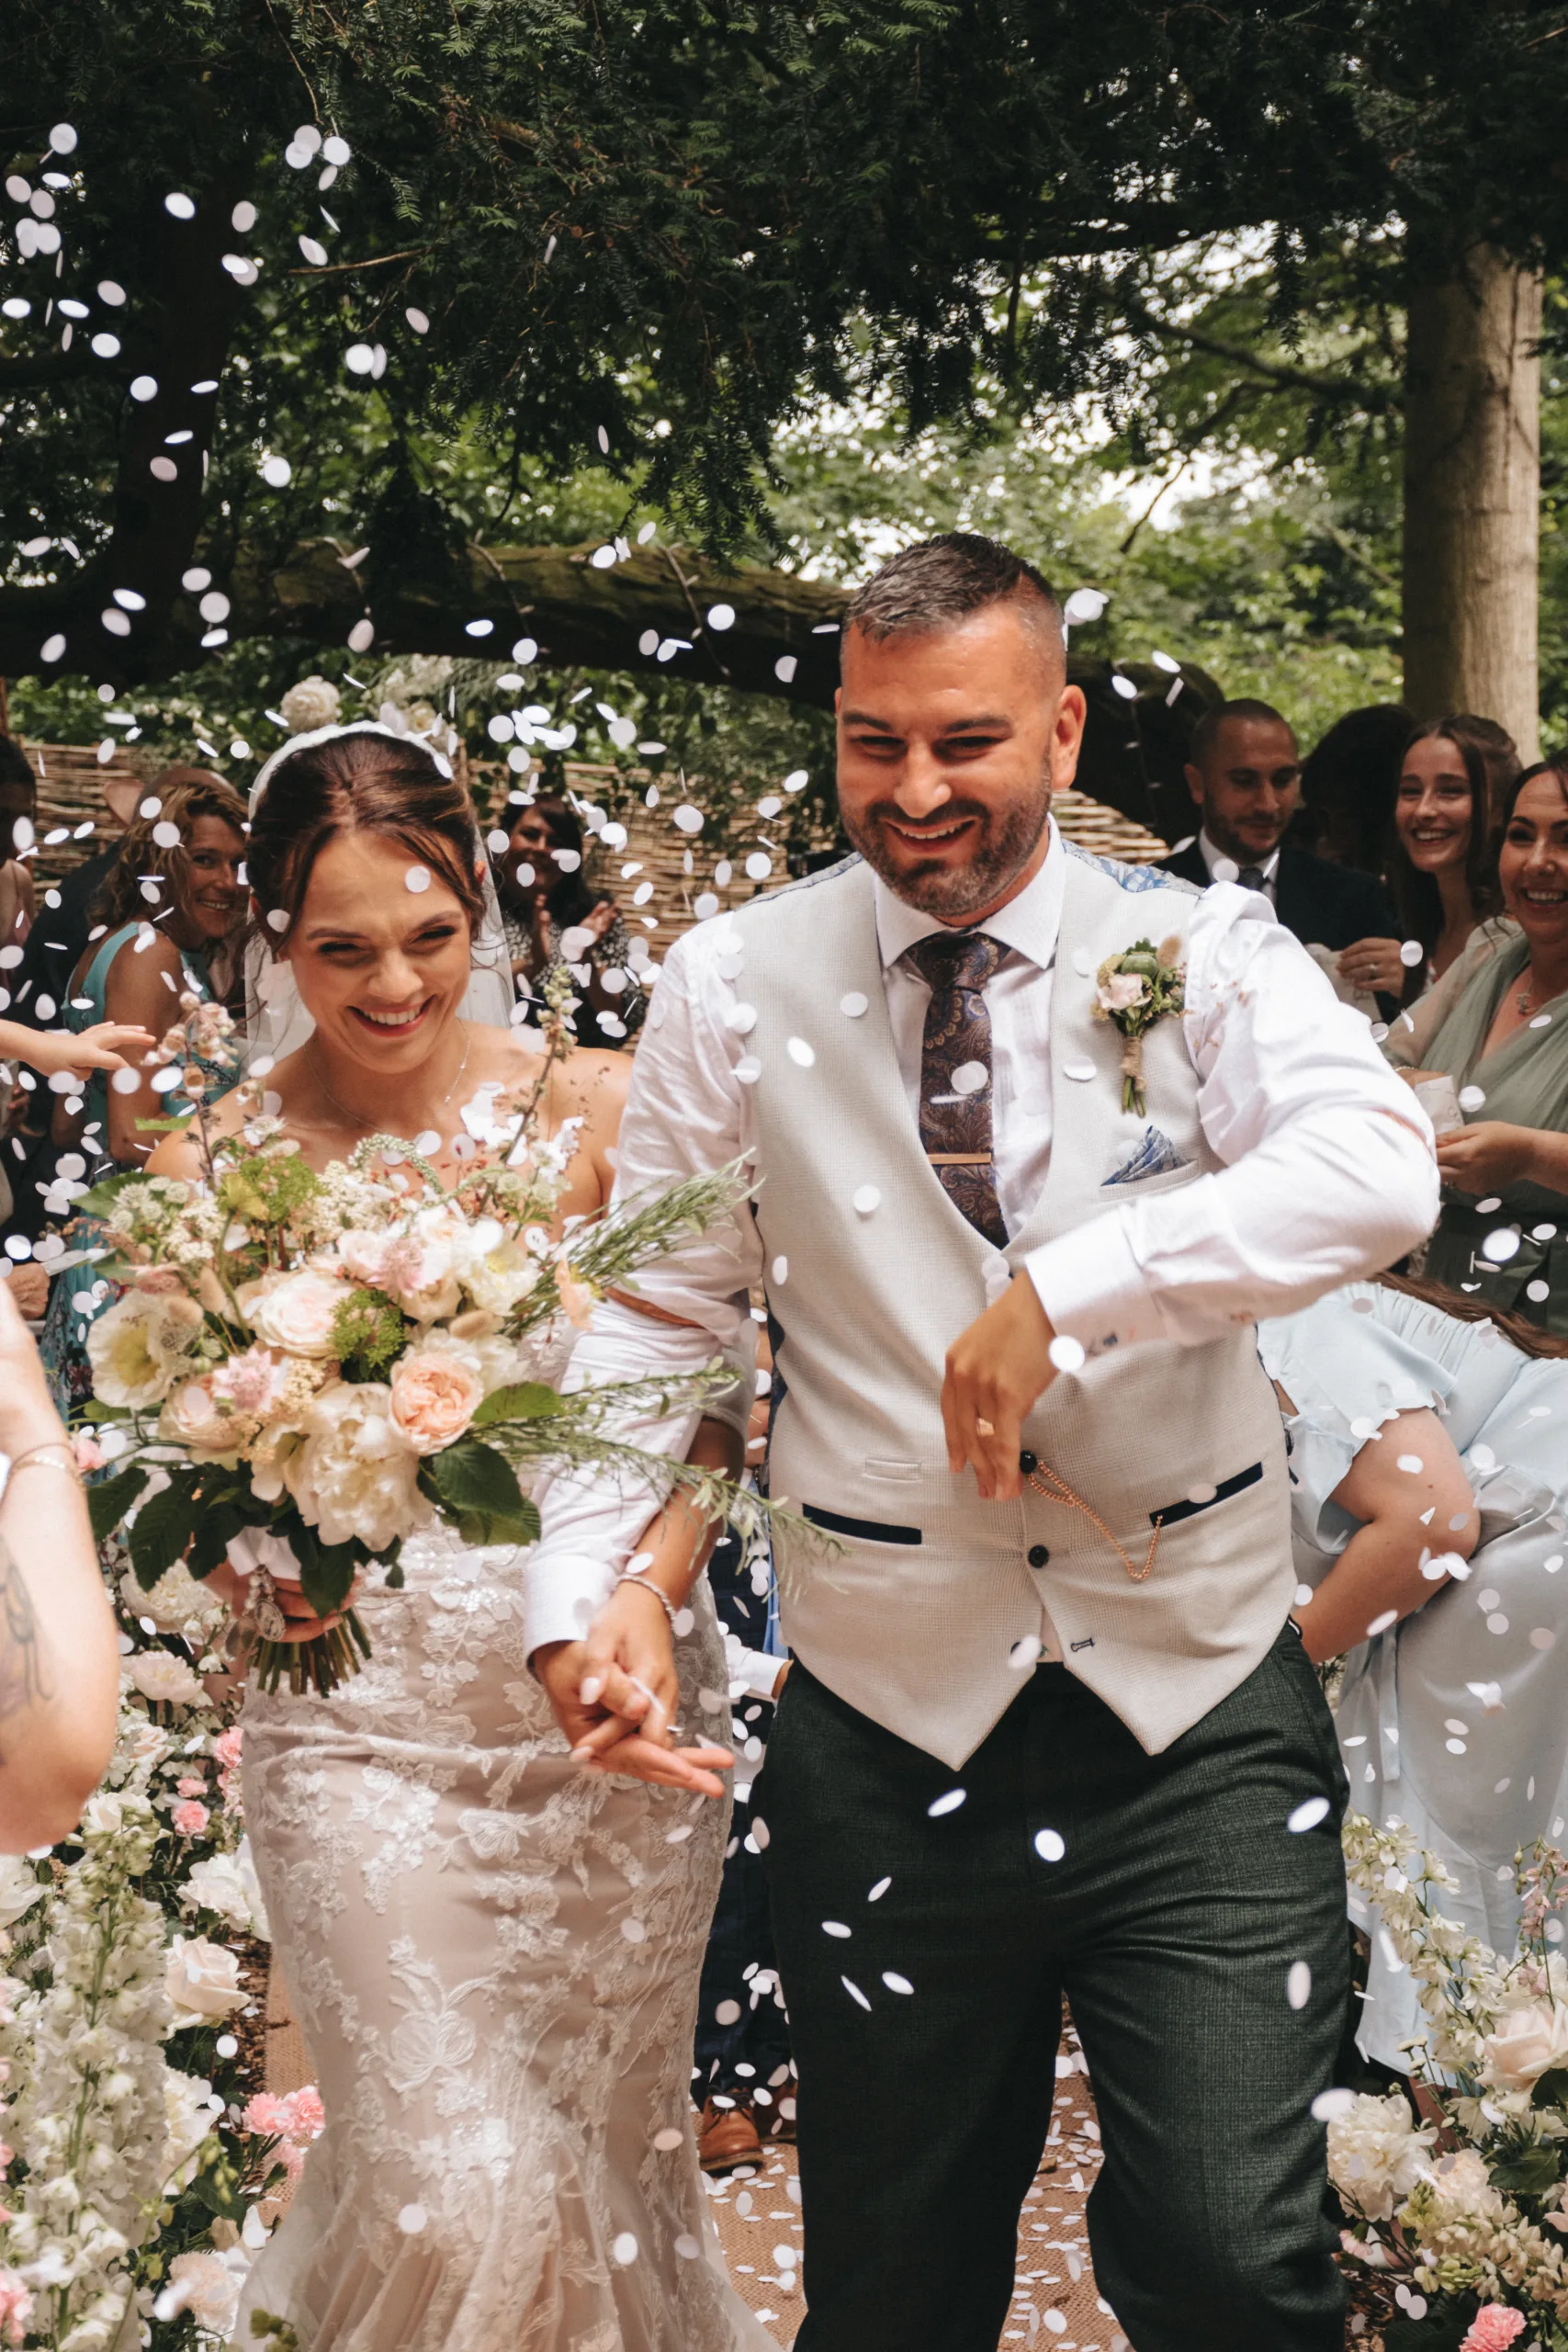 A bride and groom walk down the aisle in Yorkshire with confetti thrown at them, capturing the moment with photography.